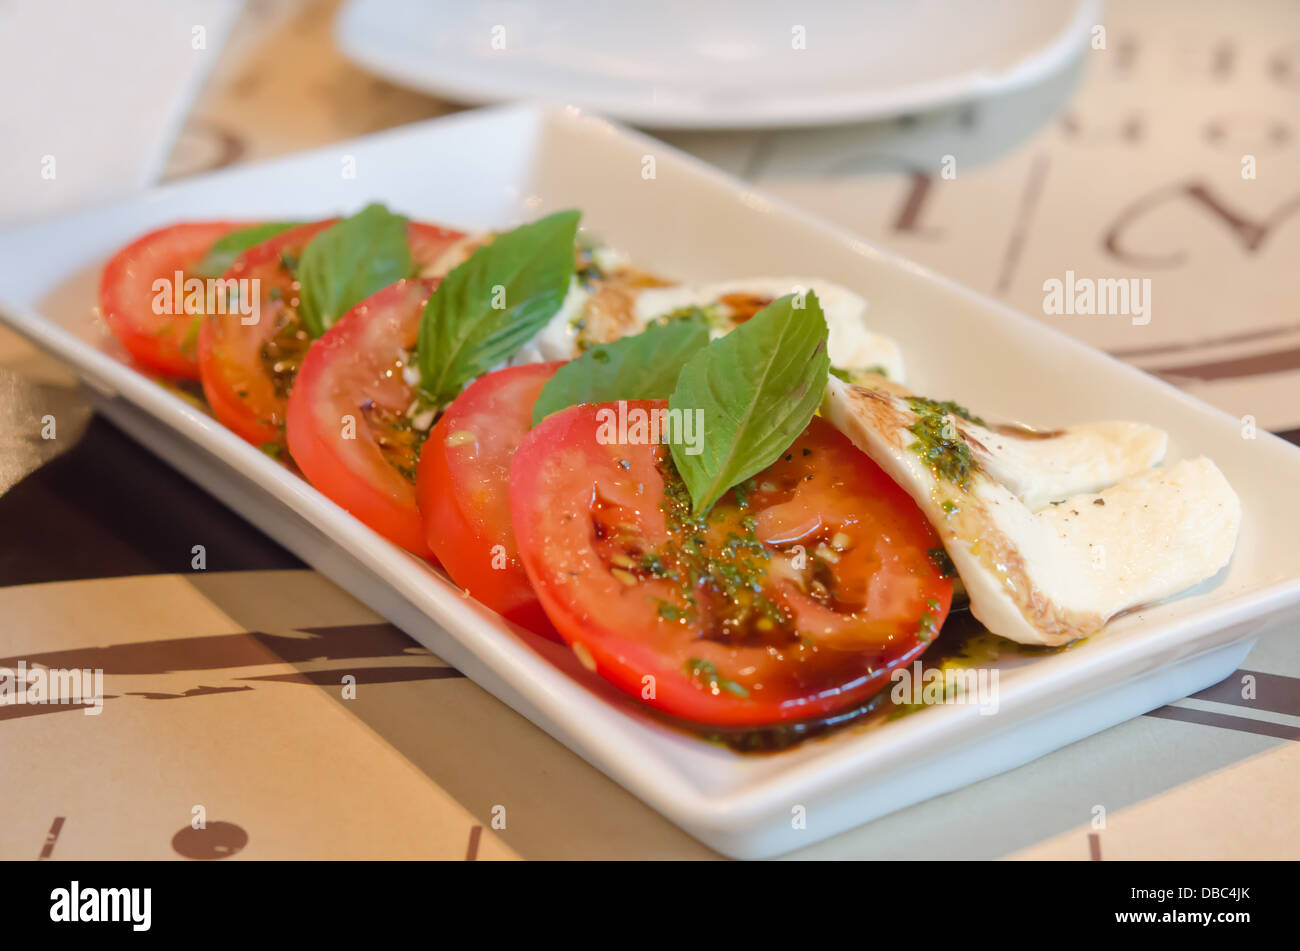 slice red tomato and mushroom with basil and delicious sauce on white plate Stock Photo